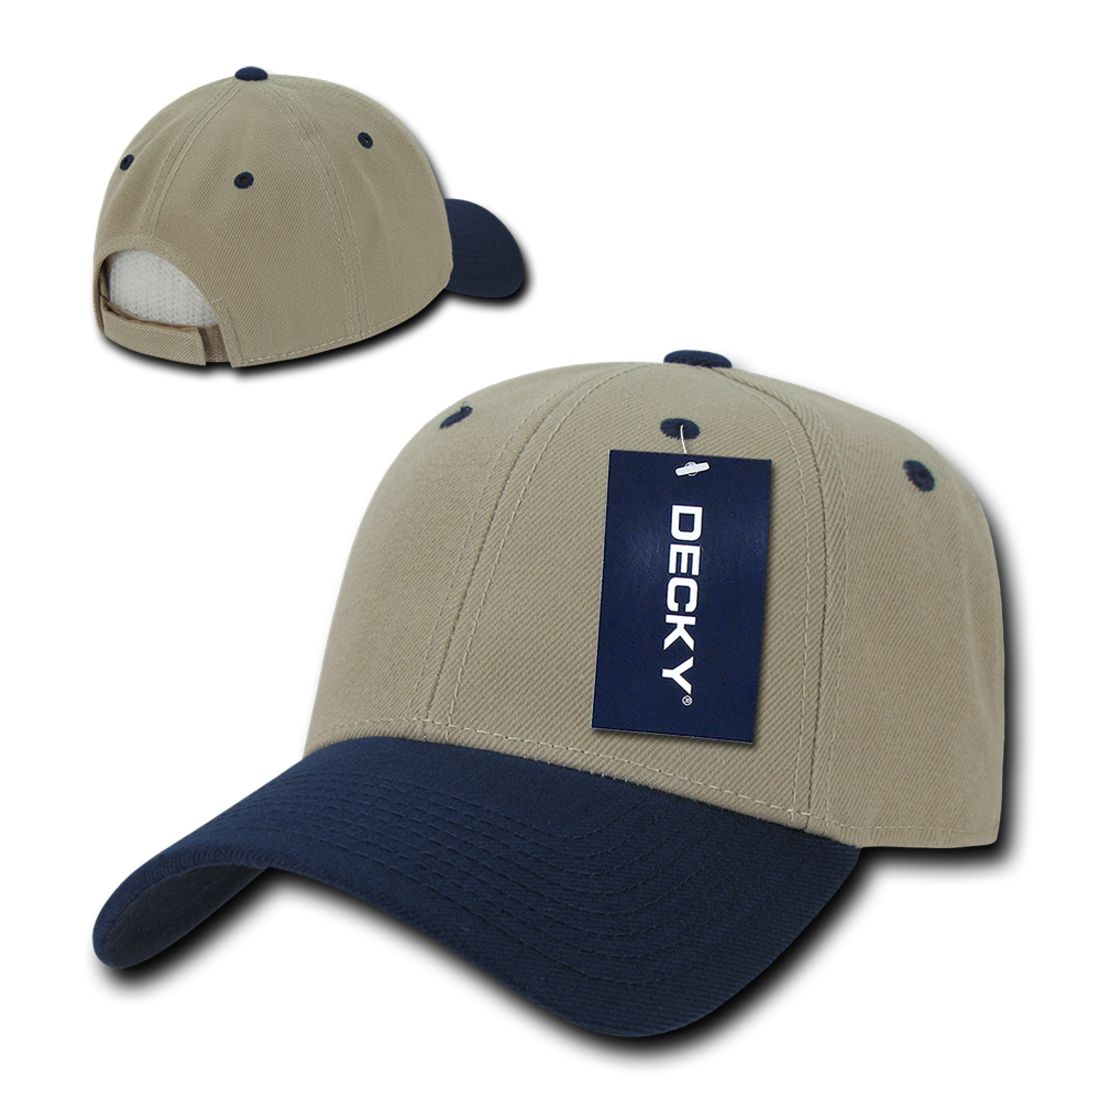 Decky 206 Low Profile Dad Hats 6 Panel Curved Bill Baseball Caps Structured Wholesale